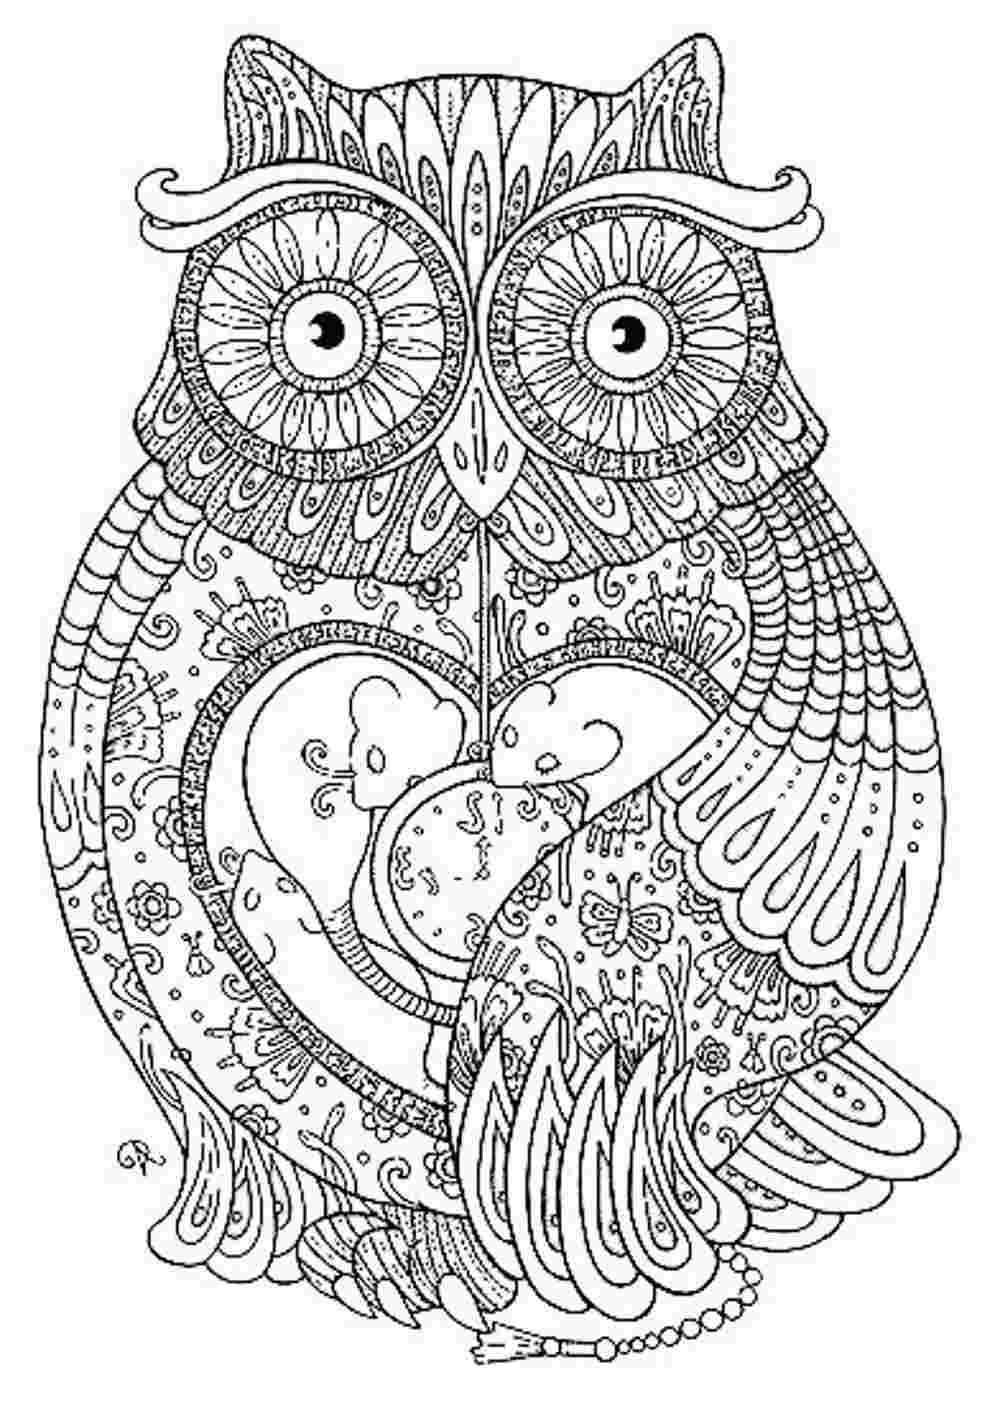 Animals Adult Coloring Pages   Coloring Pages For All Ages ...